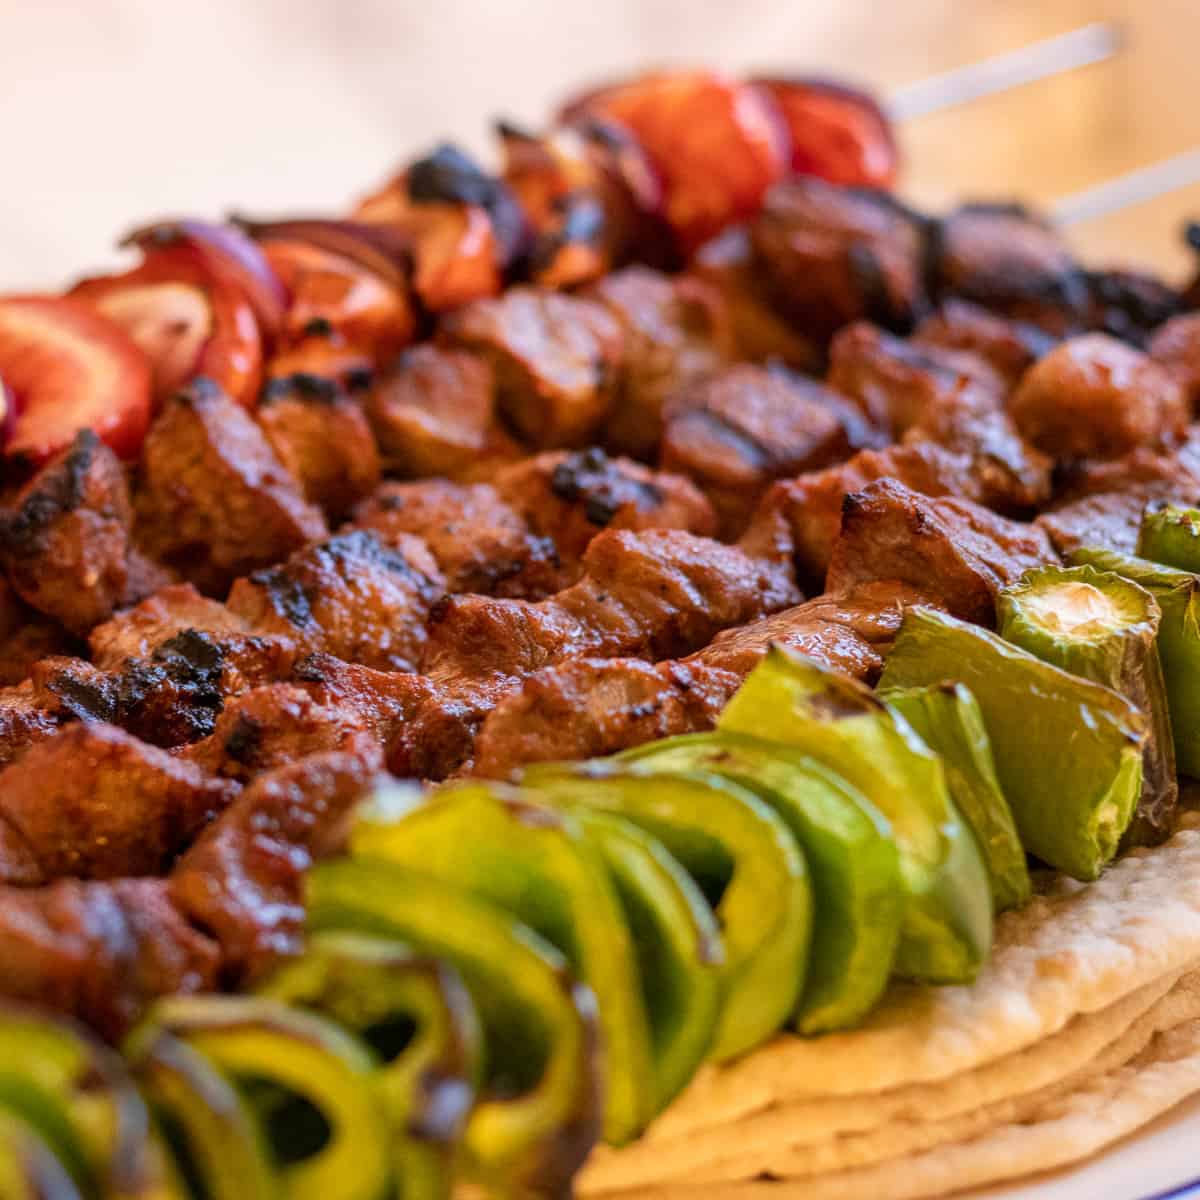 Lamb shish kebabs are cooked on the bbq